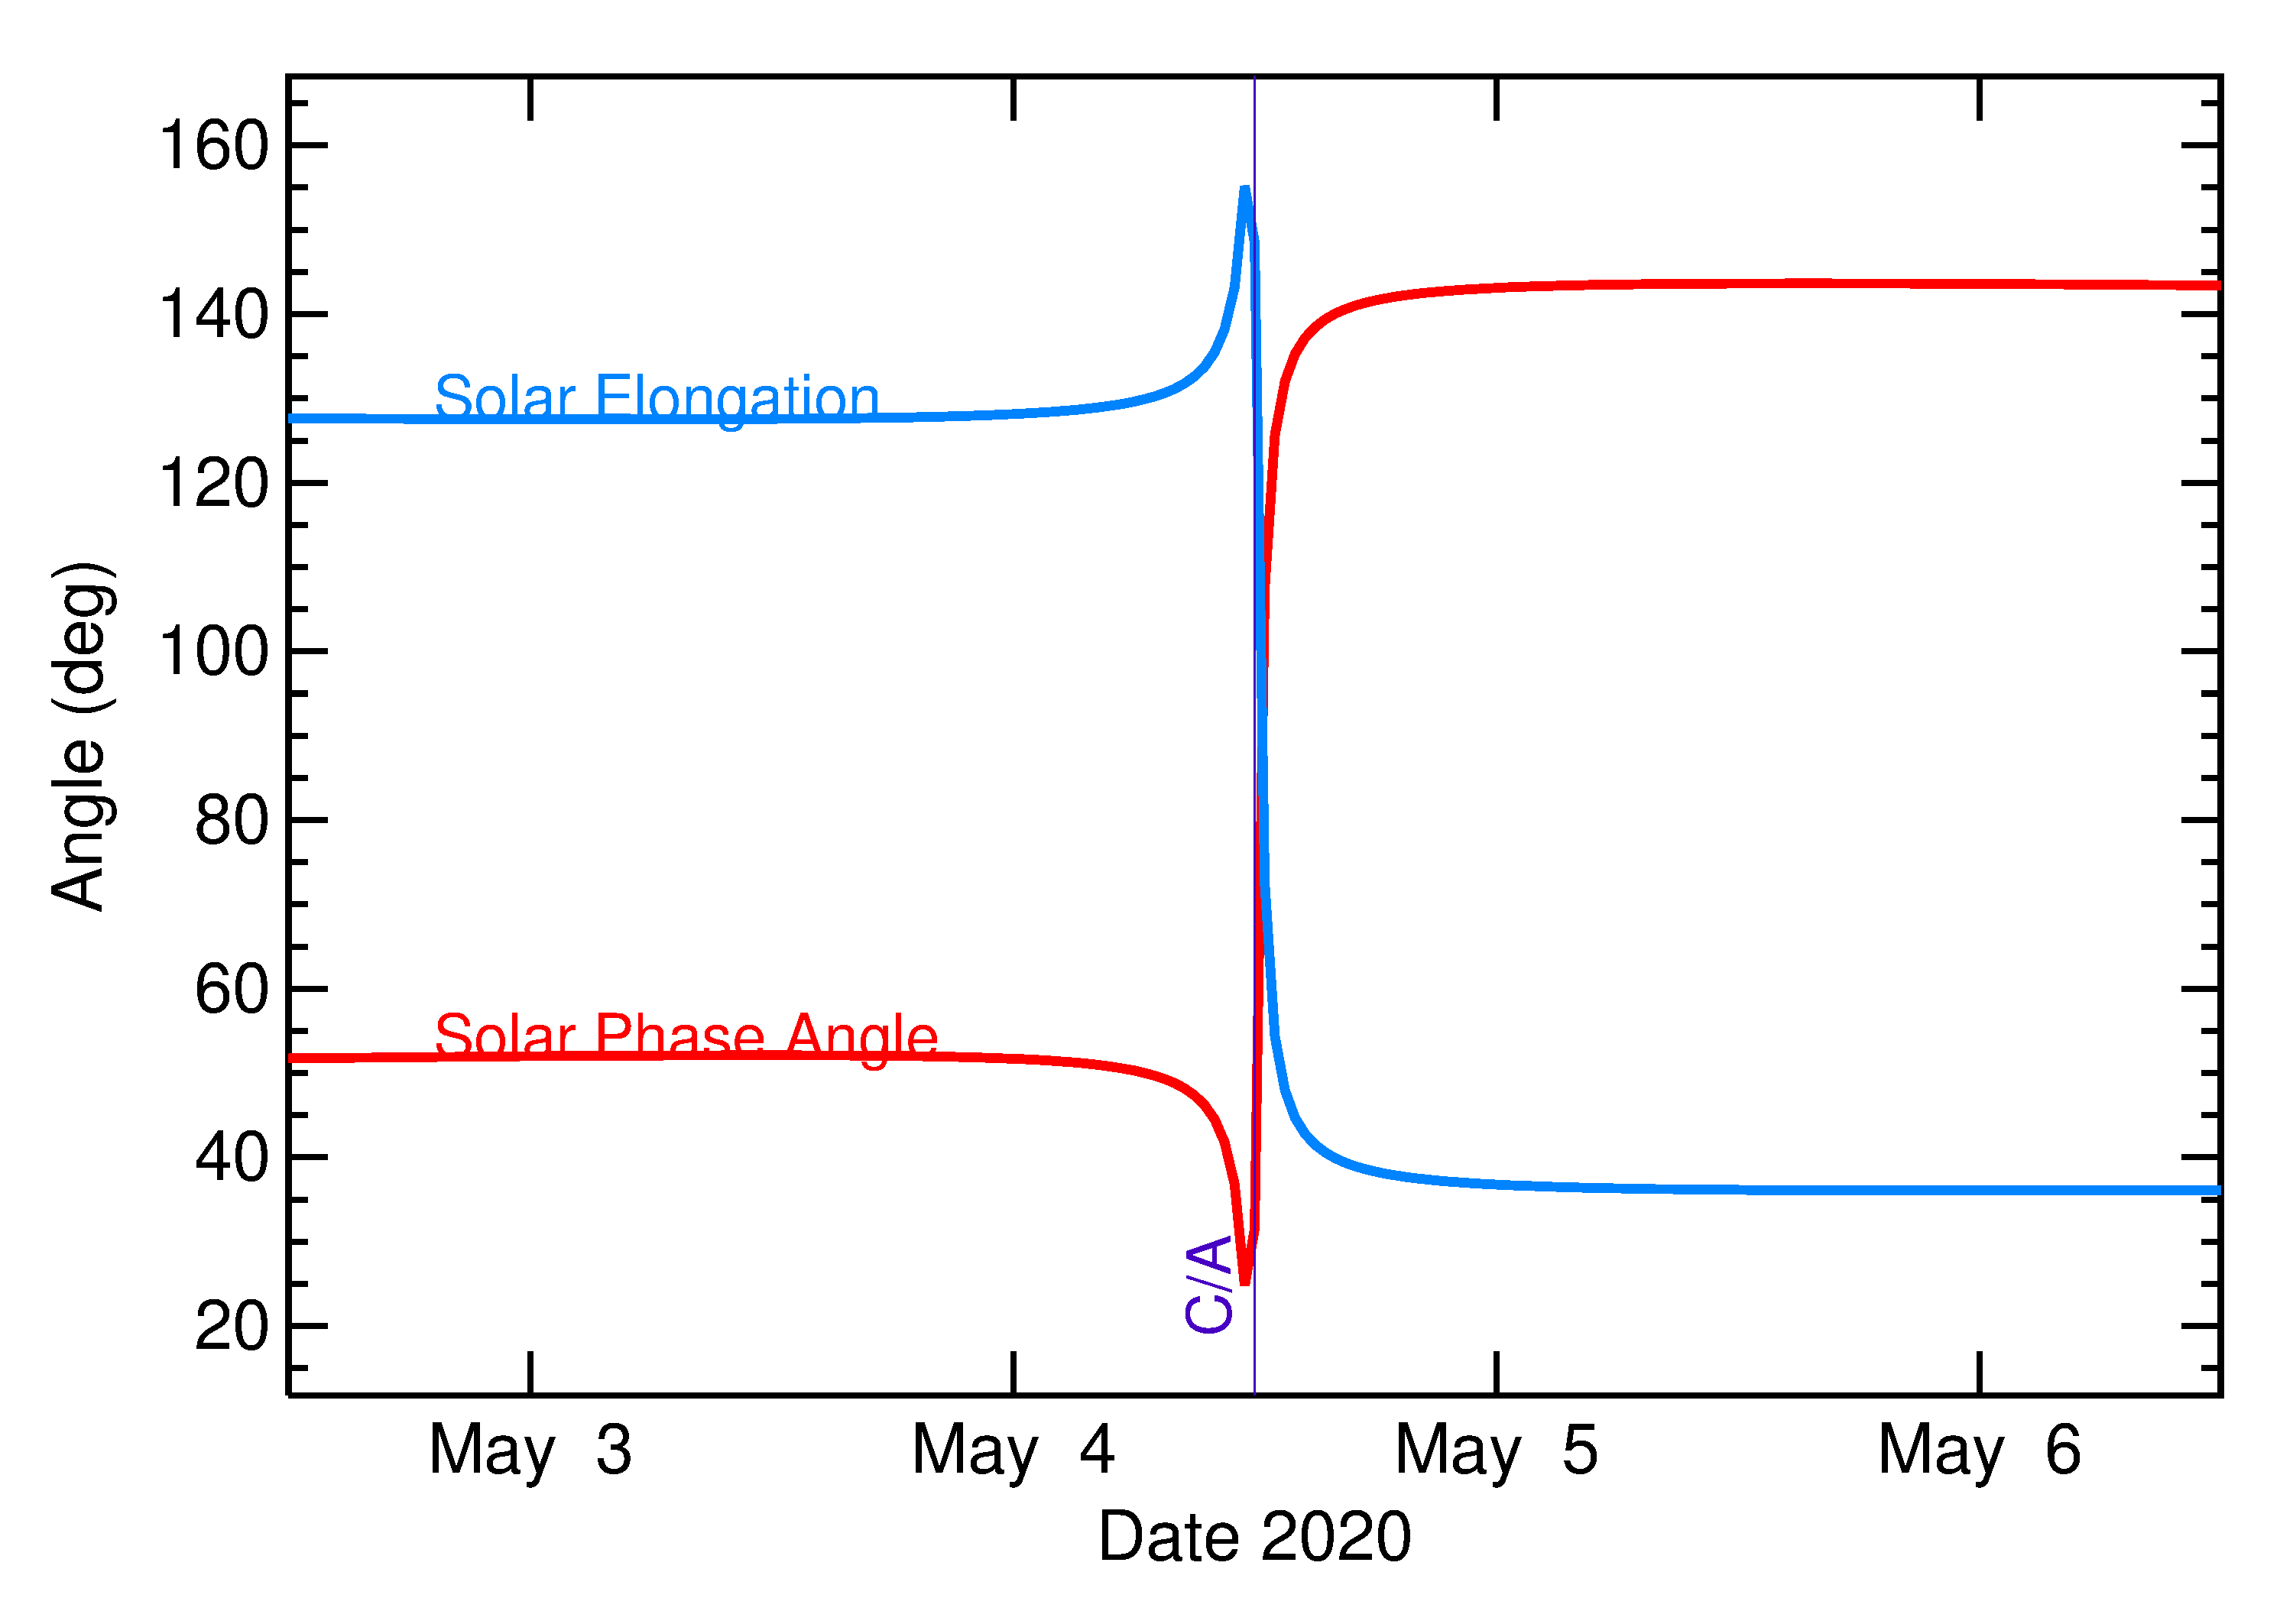 Solar Elongation and Solar Phase Angle of 2020 JJ in the days around closest approach